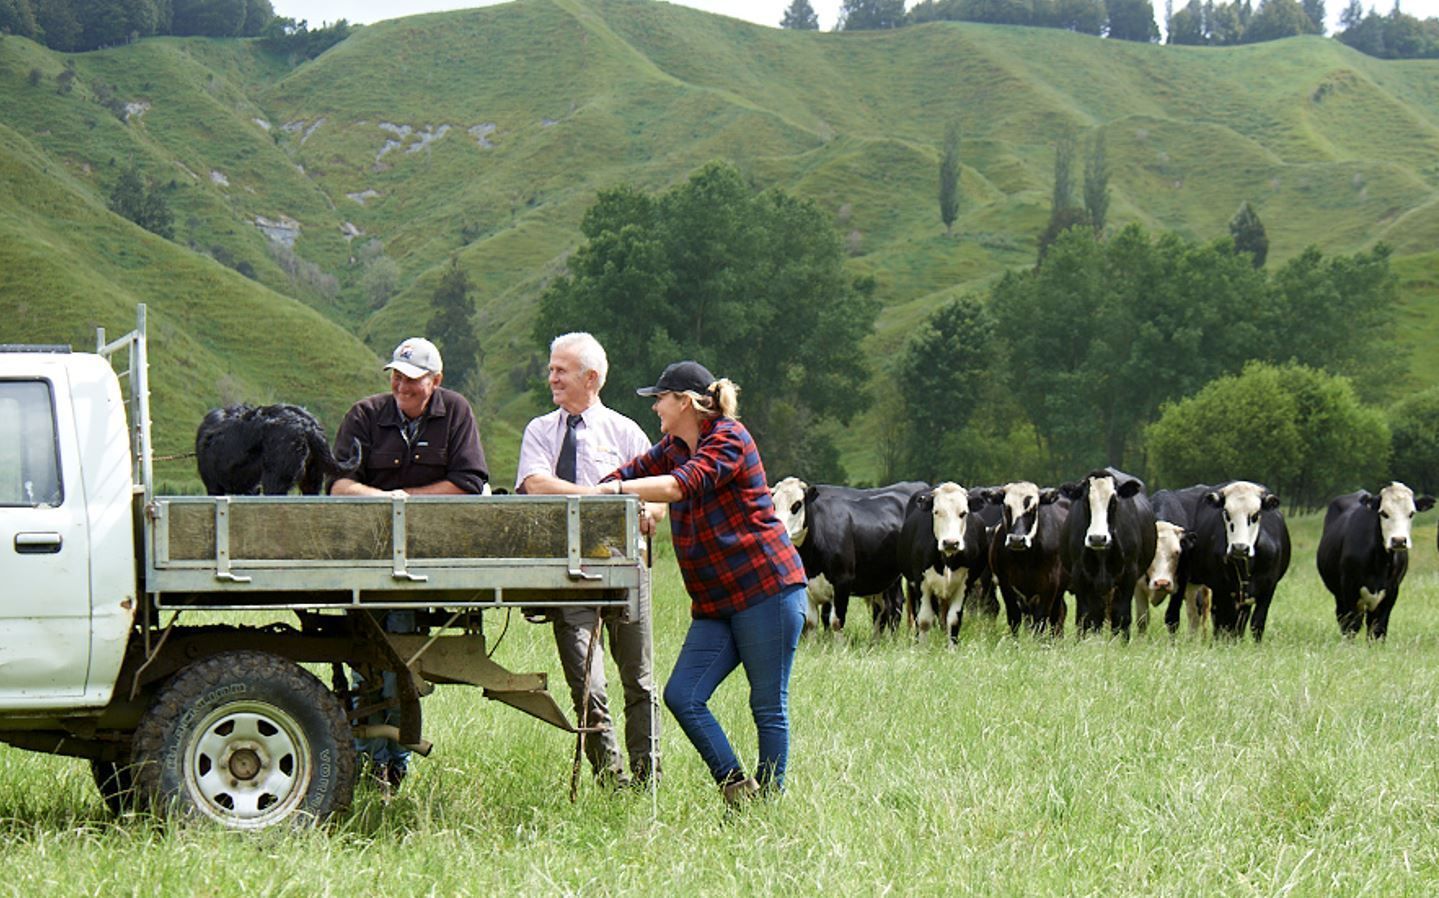 Farmers with branded caps and promotional merchandise